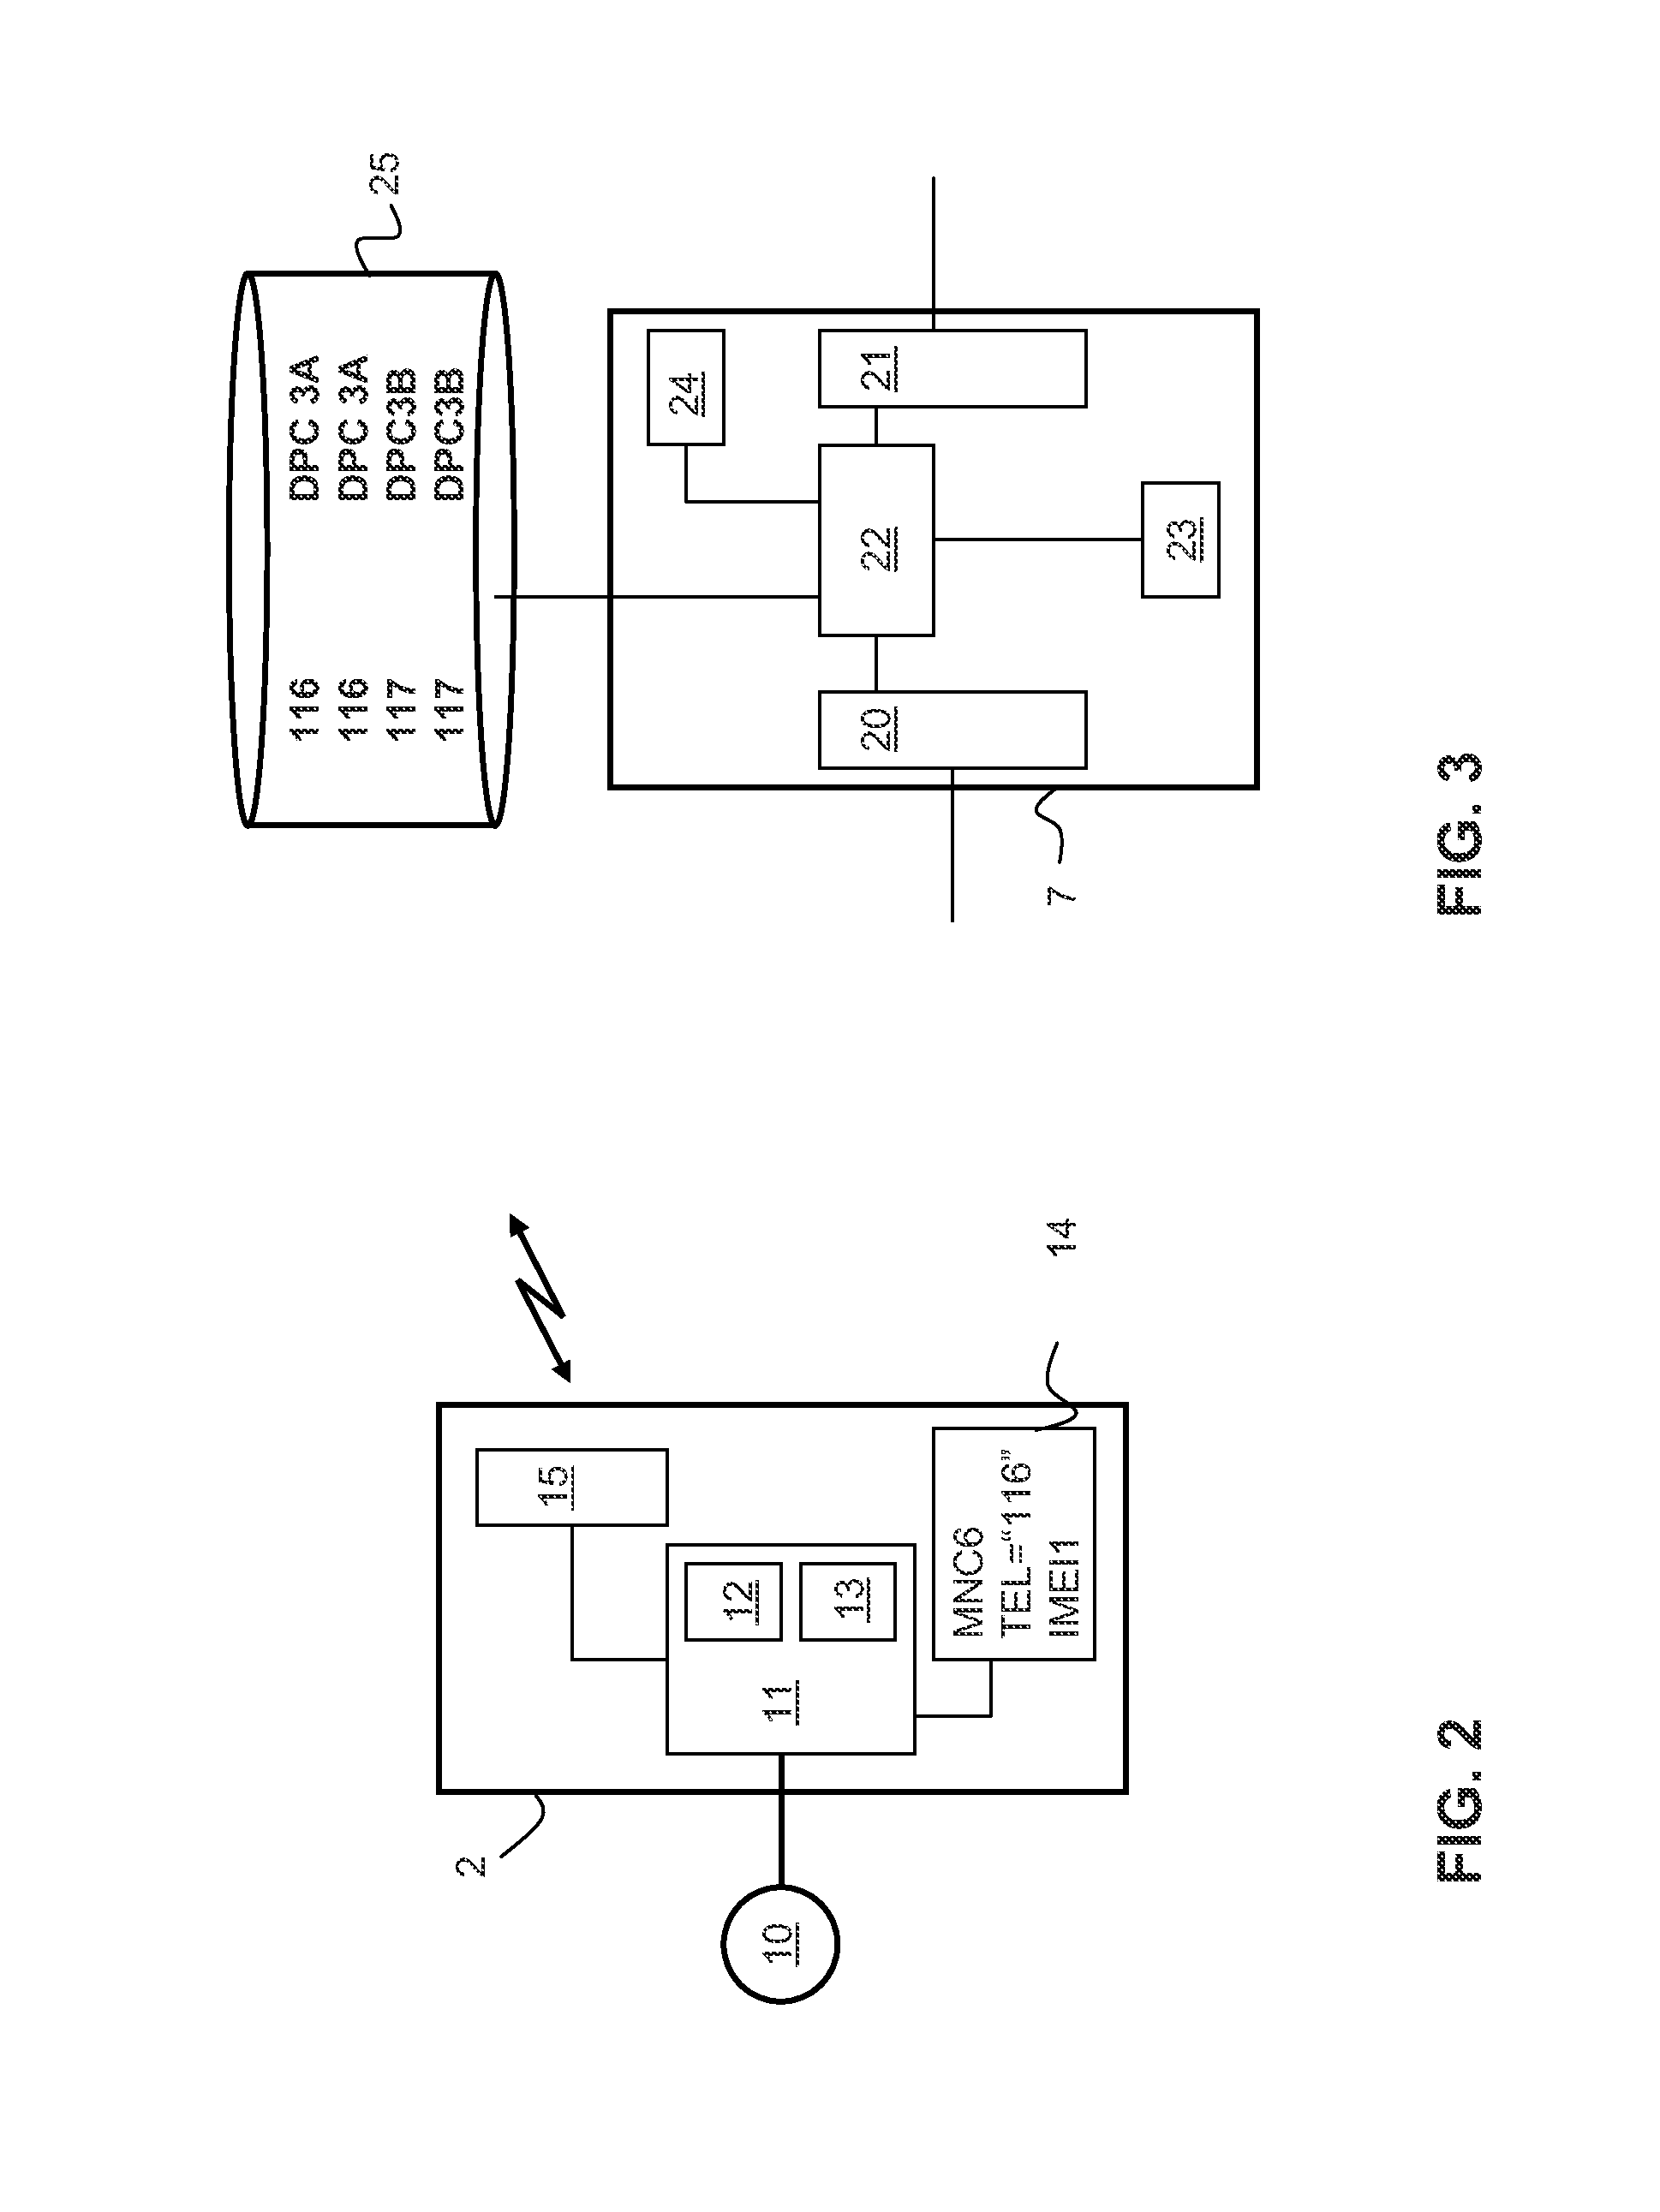 Method for Transferring Data from a Plurality of SIM-Less Communication Modules